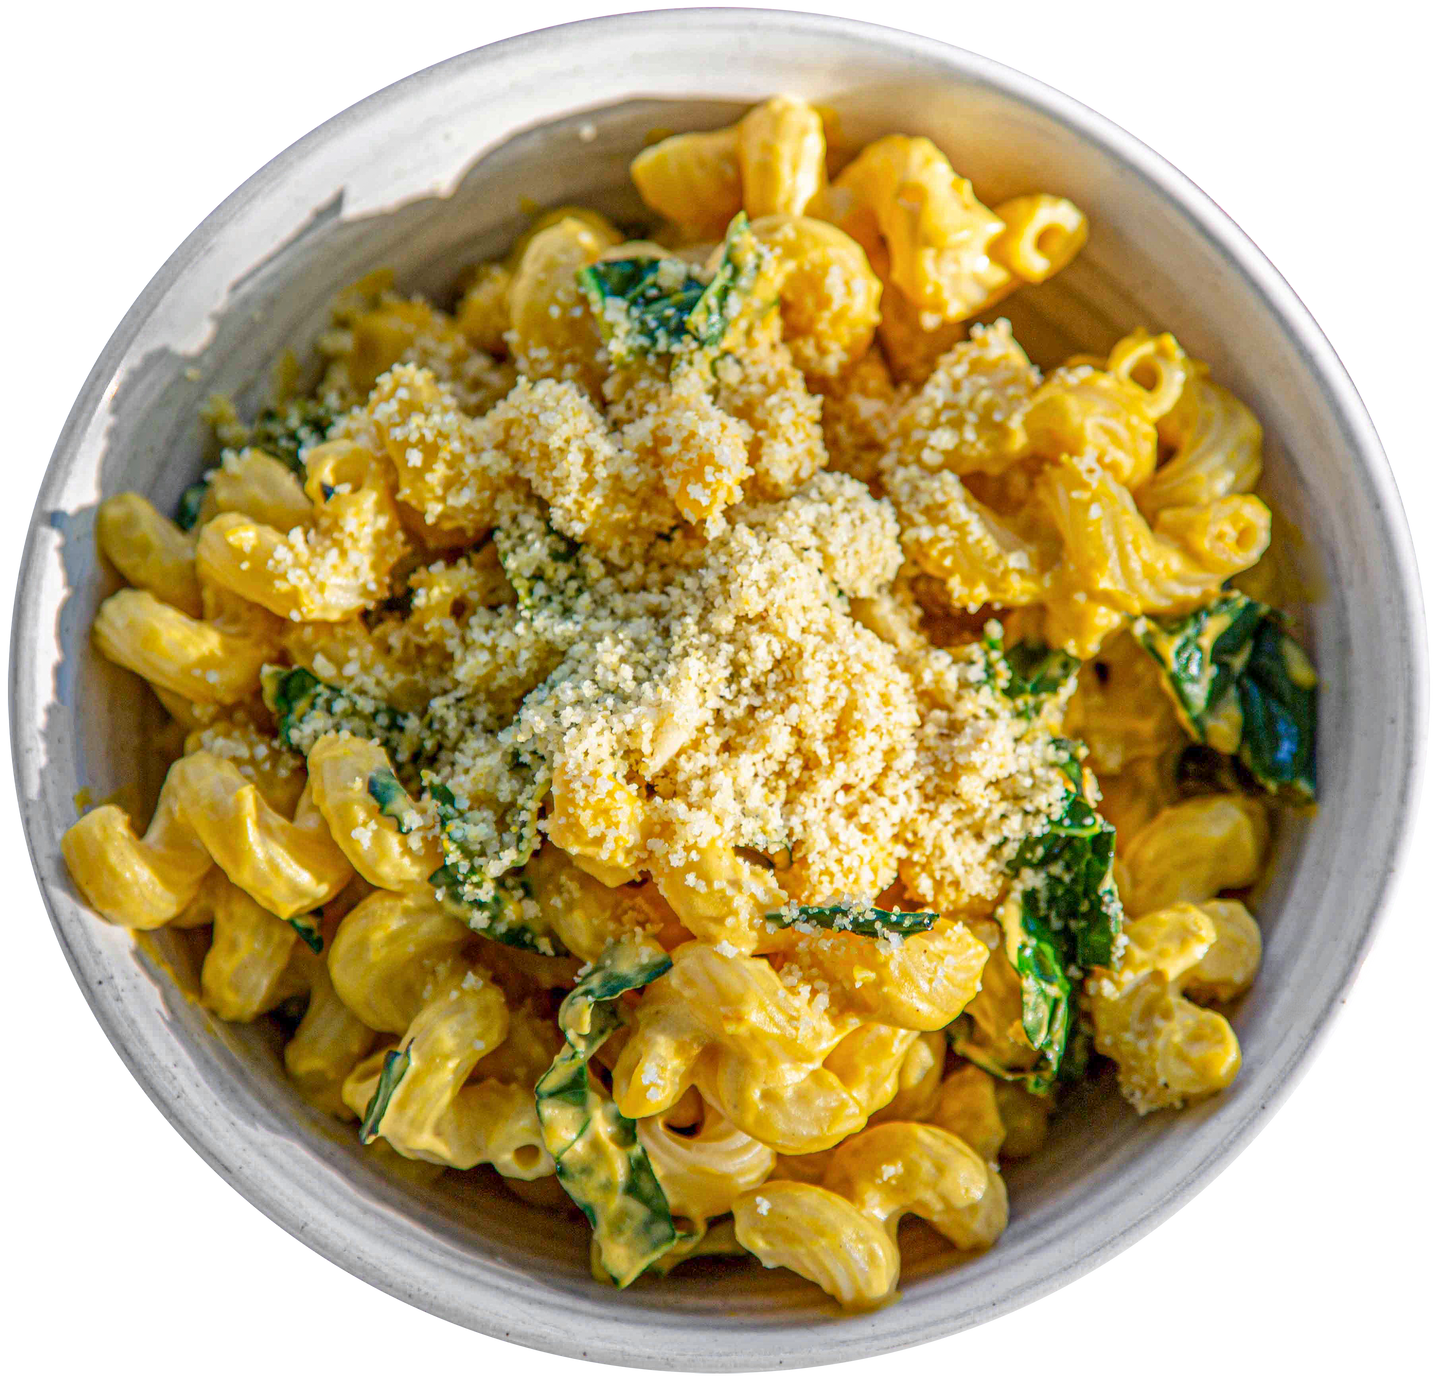 Vegan vegetarian plant-based macaroni and cheese in Des Moines, Iowa